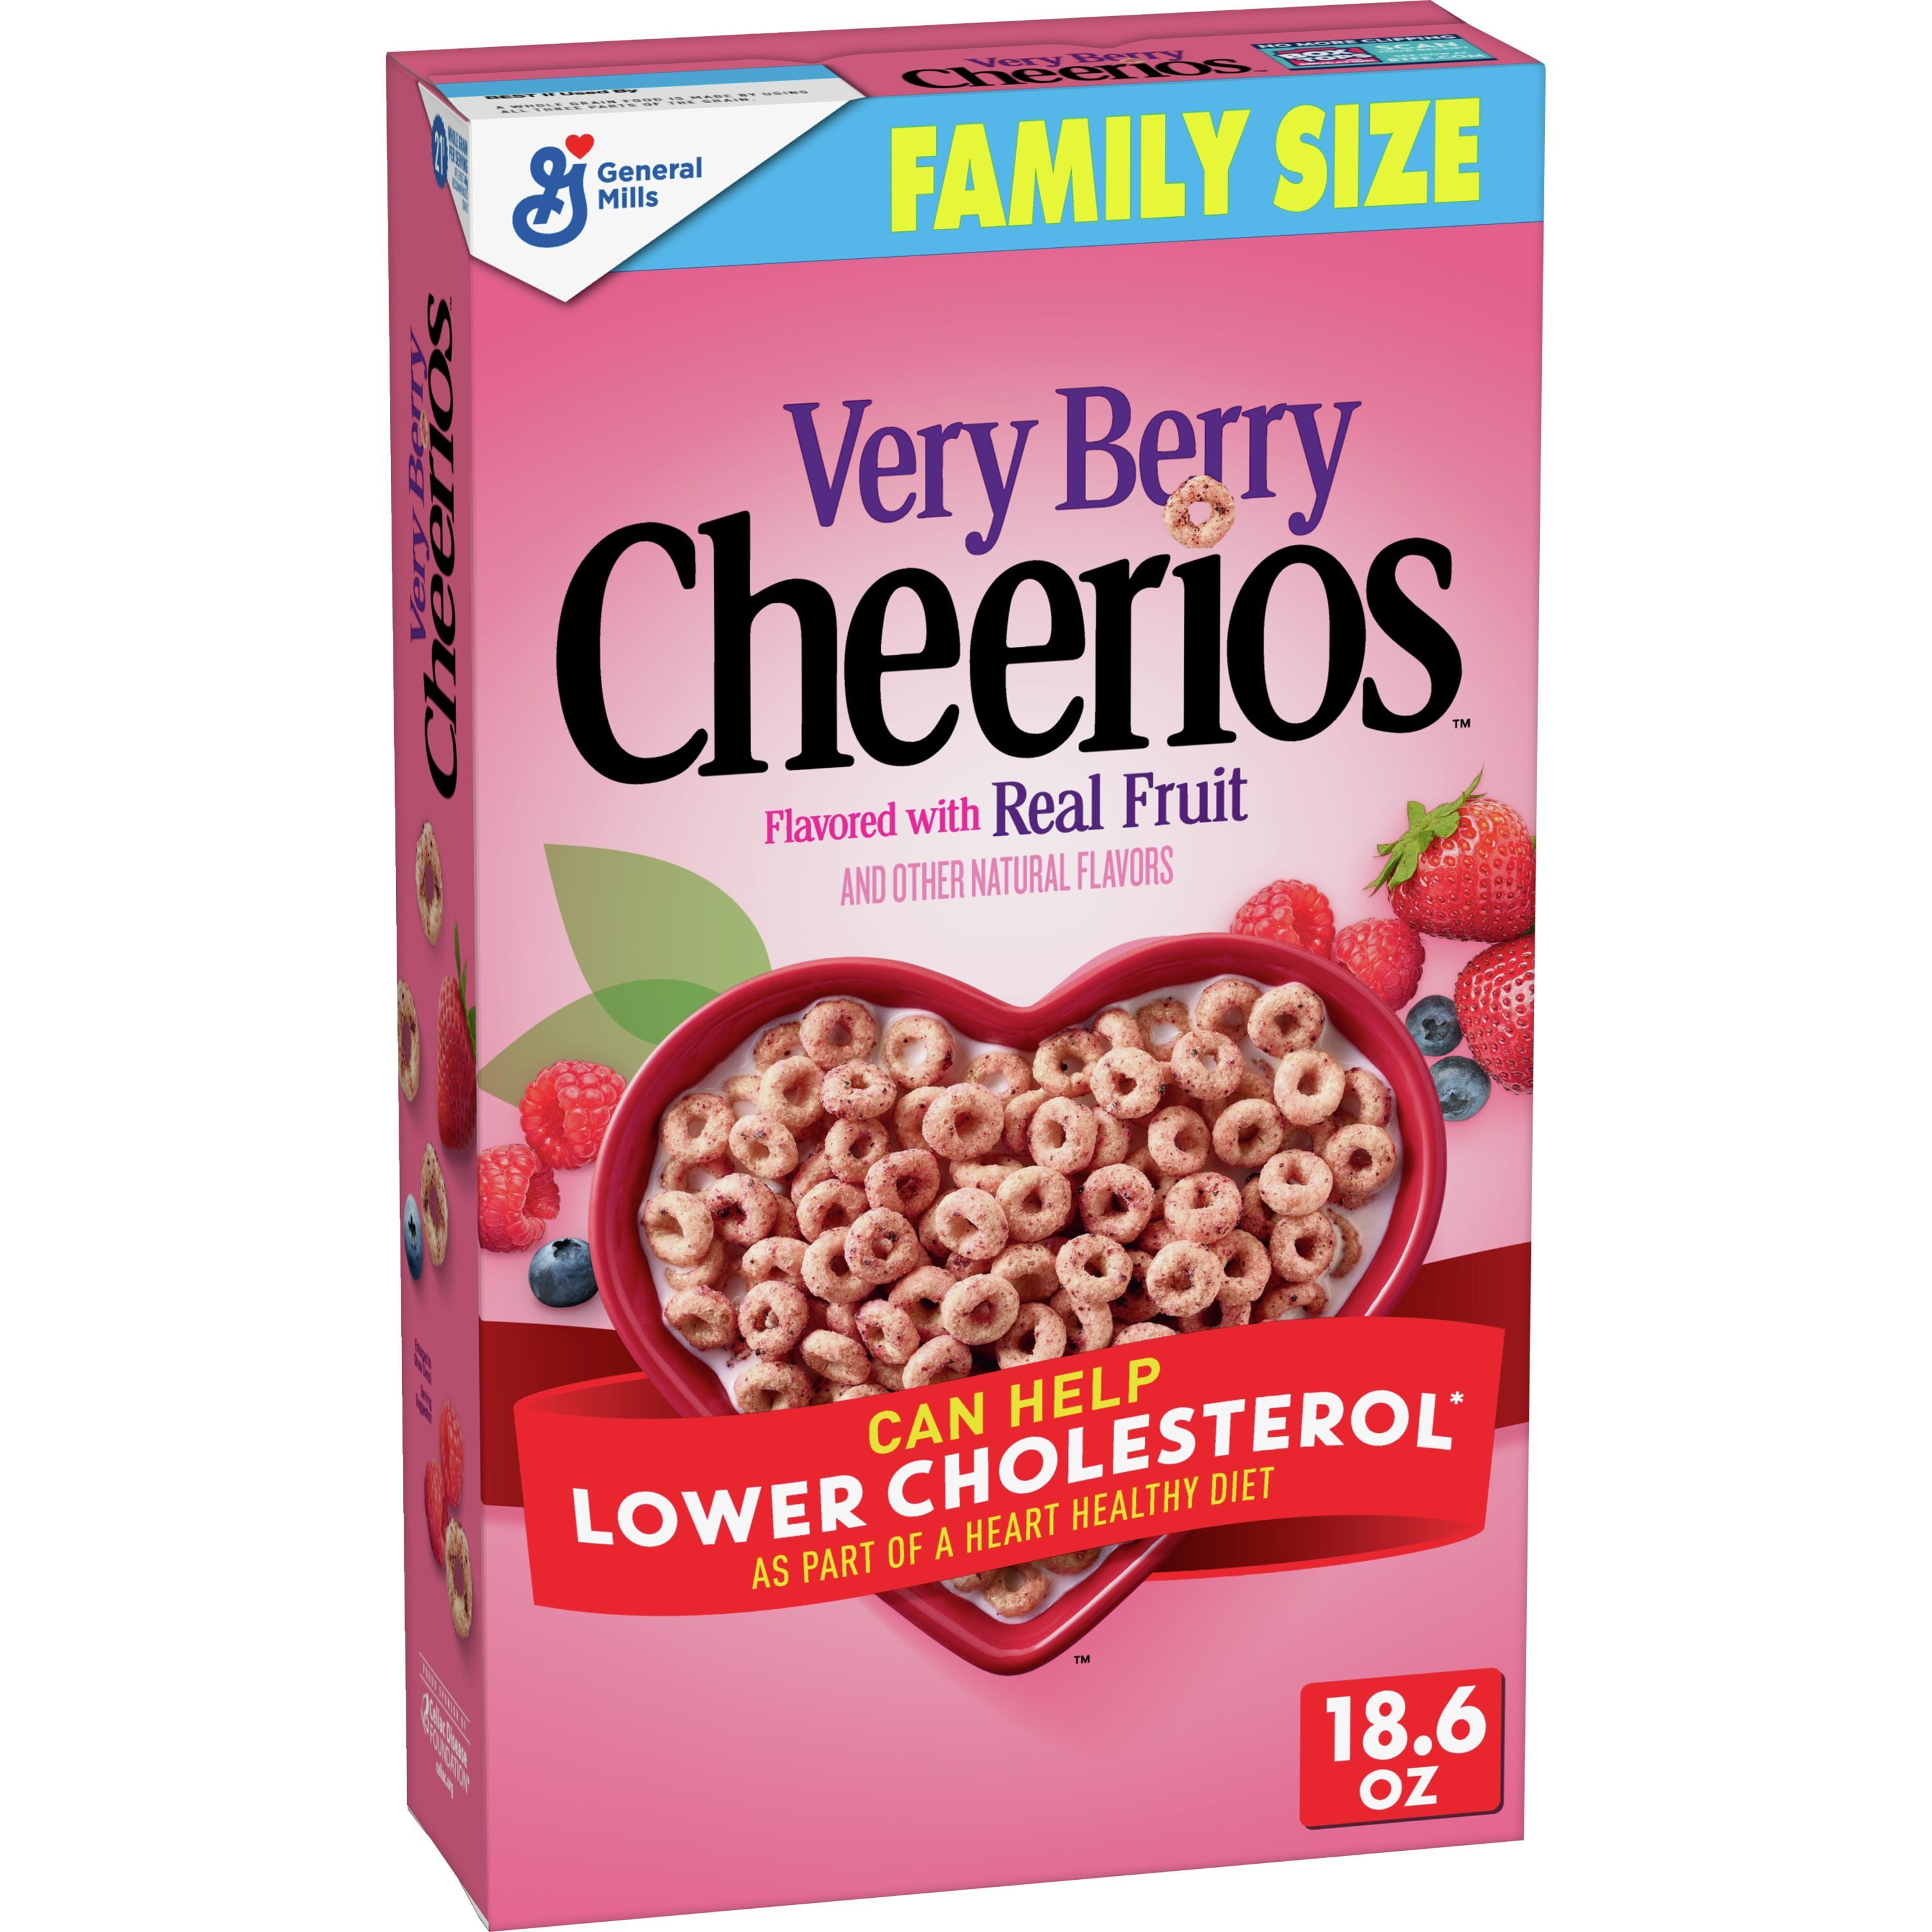 Very Berry Cheerios, Heart Healthy Cereal, 18.6 OZ Family Size Box